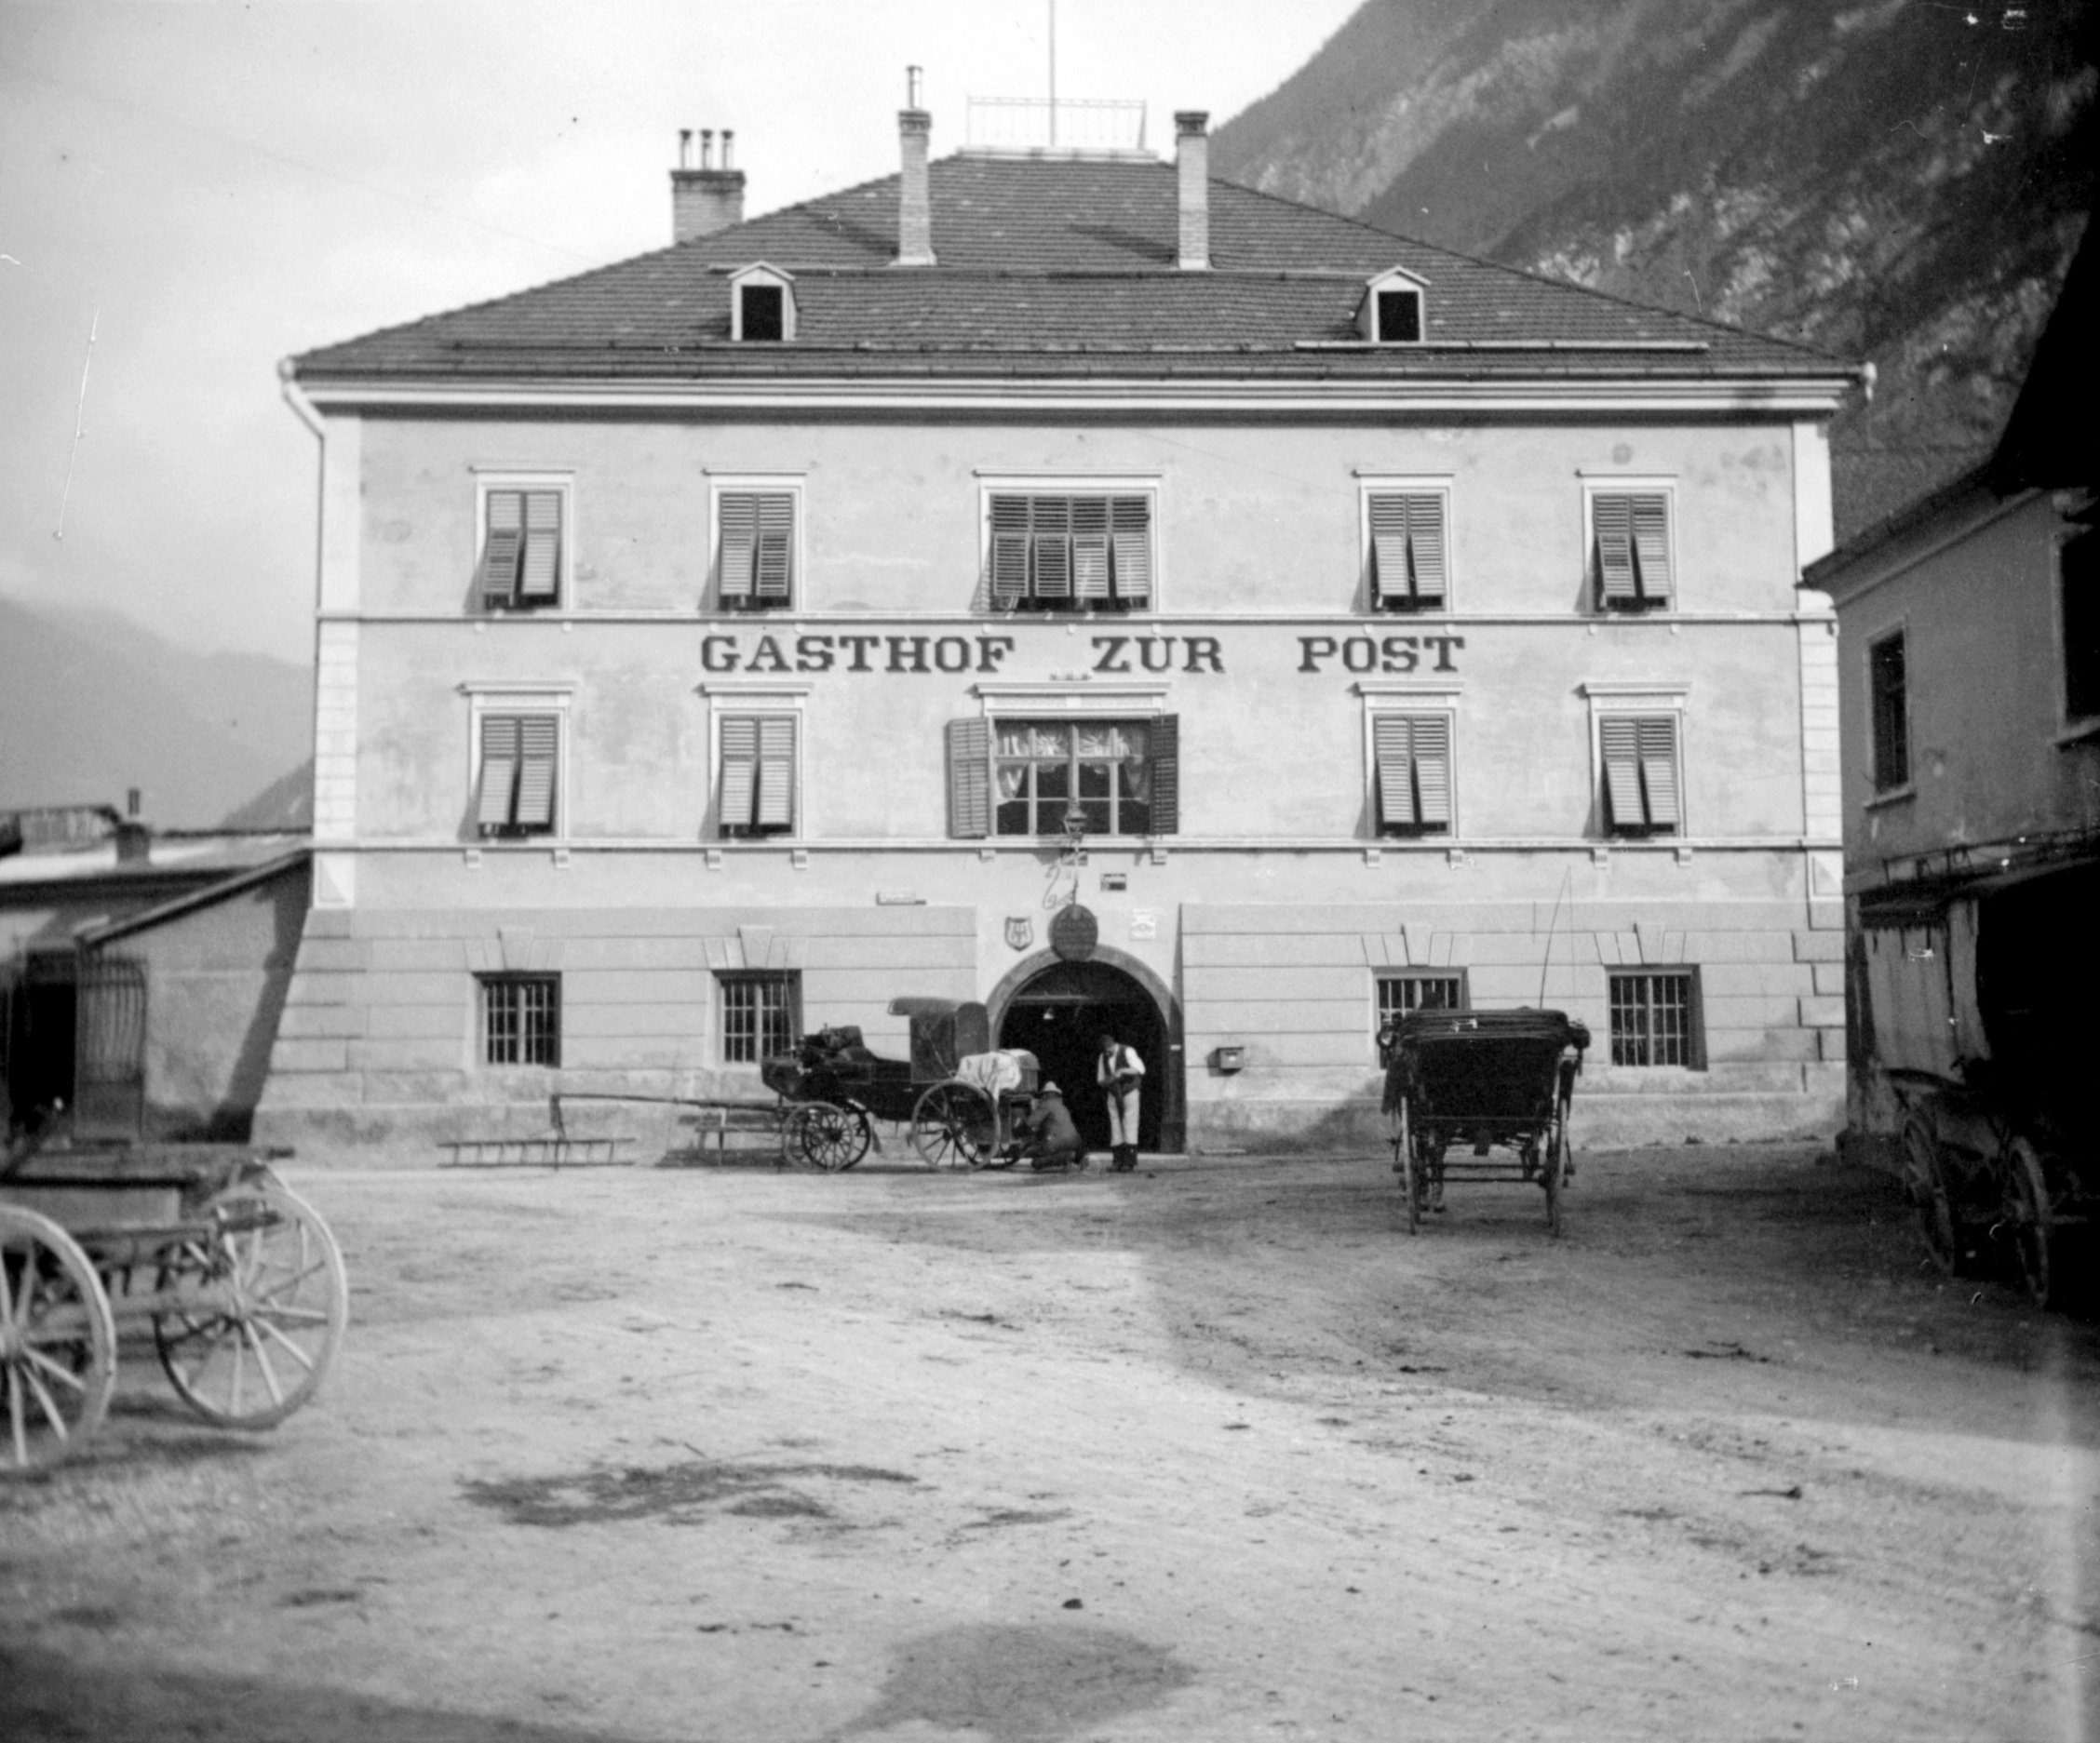 Gasthof "Zur Post" in Nassereith (September 1902), 87256 sn R_o (DRM CC BY-NC-SA)